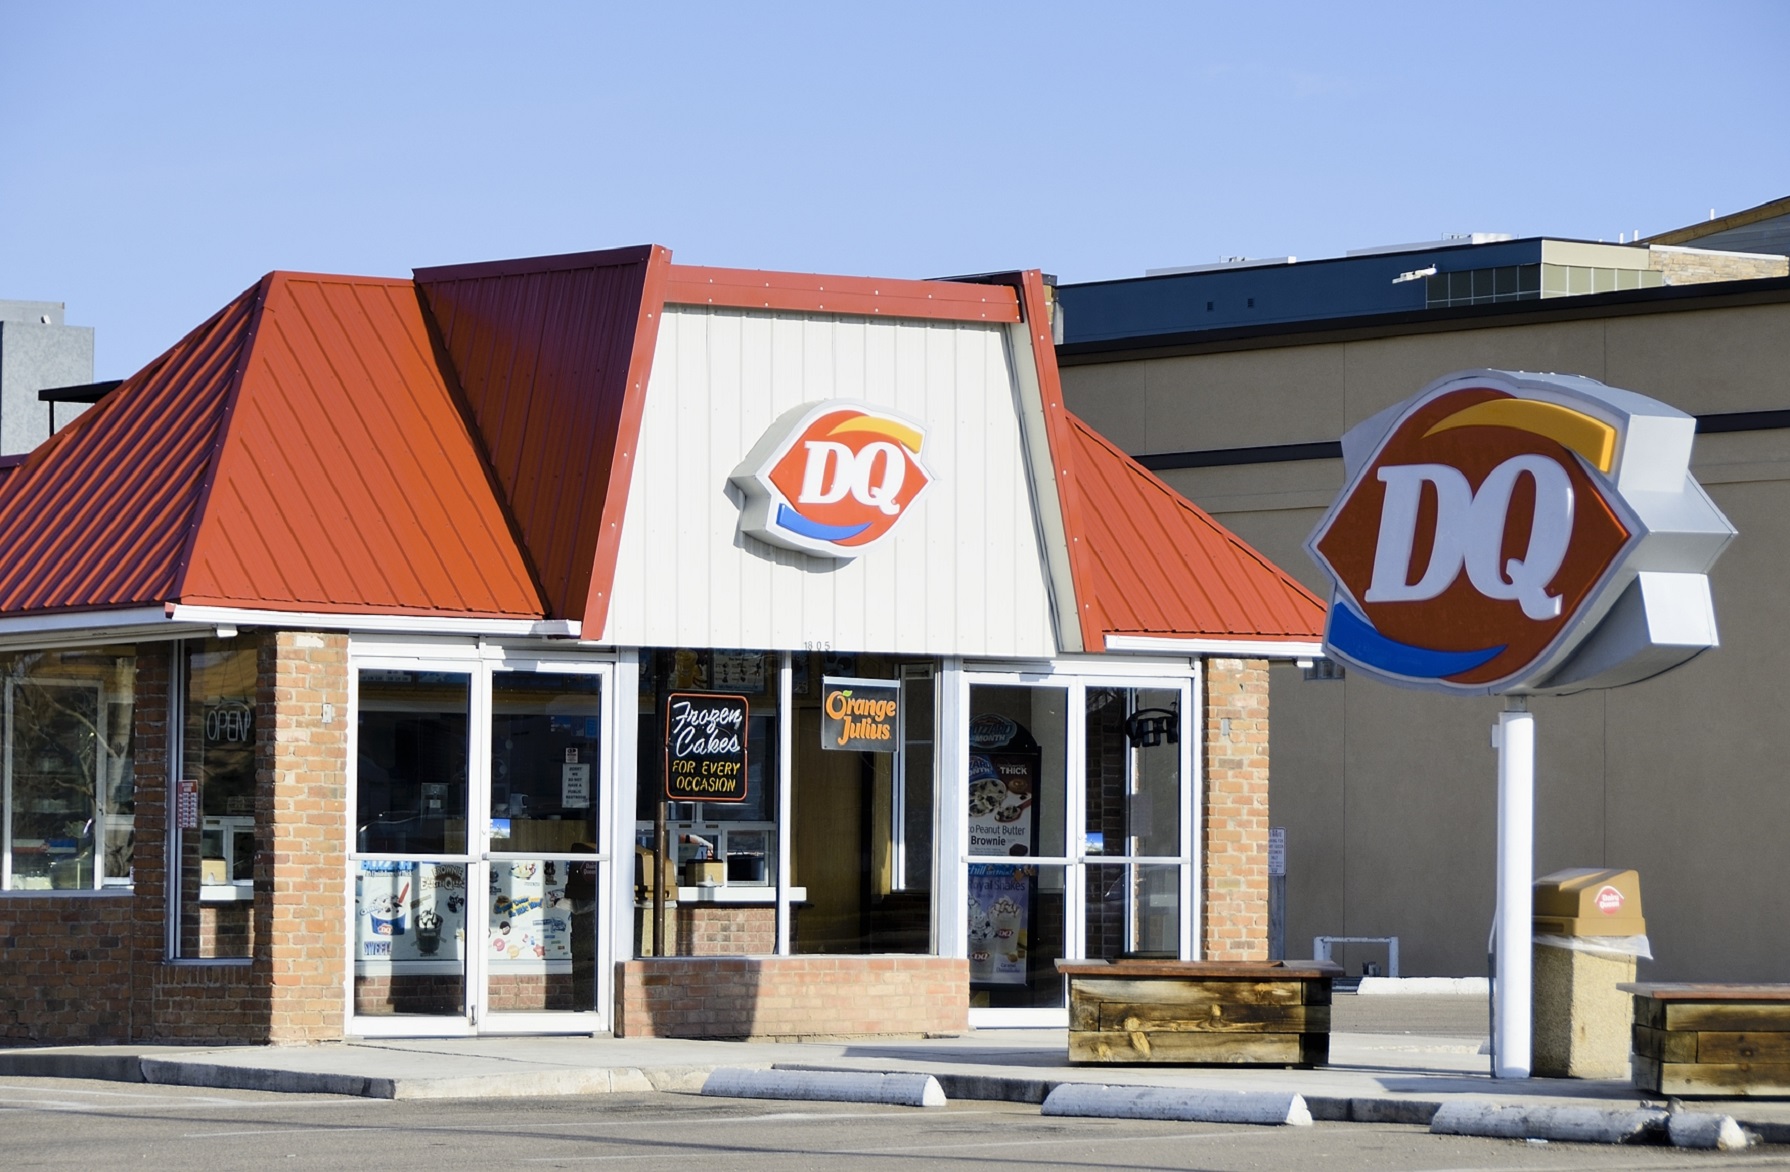 When Does Dairy Queen Close?